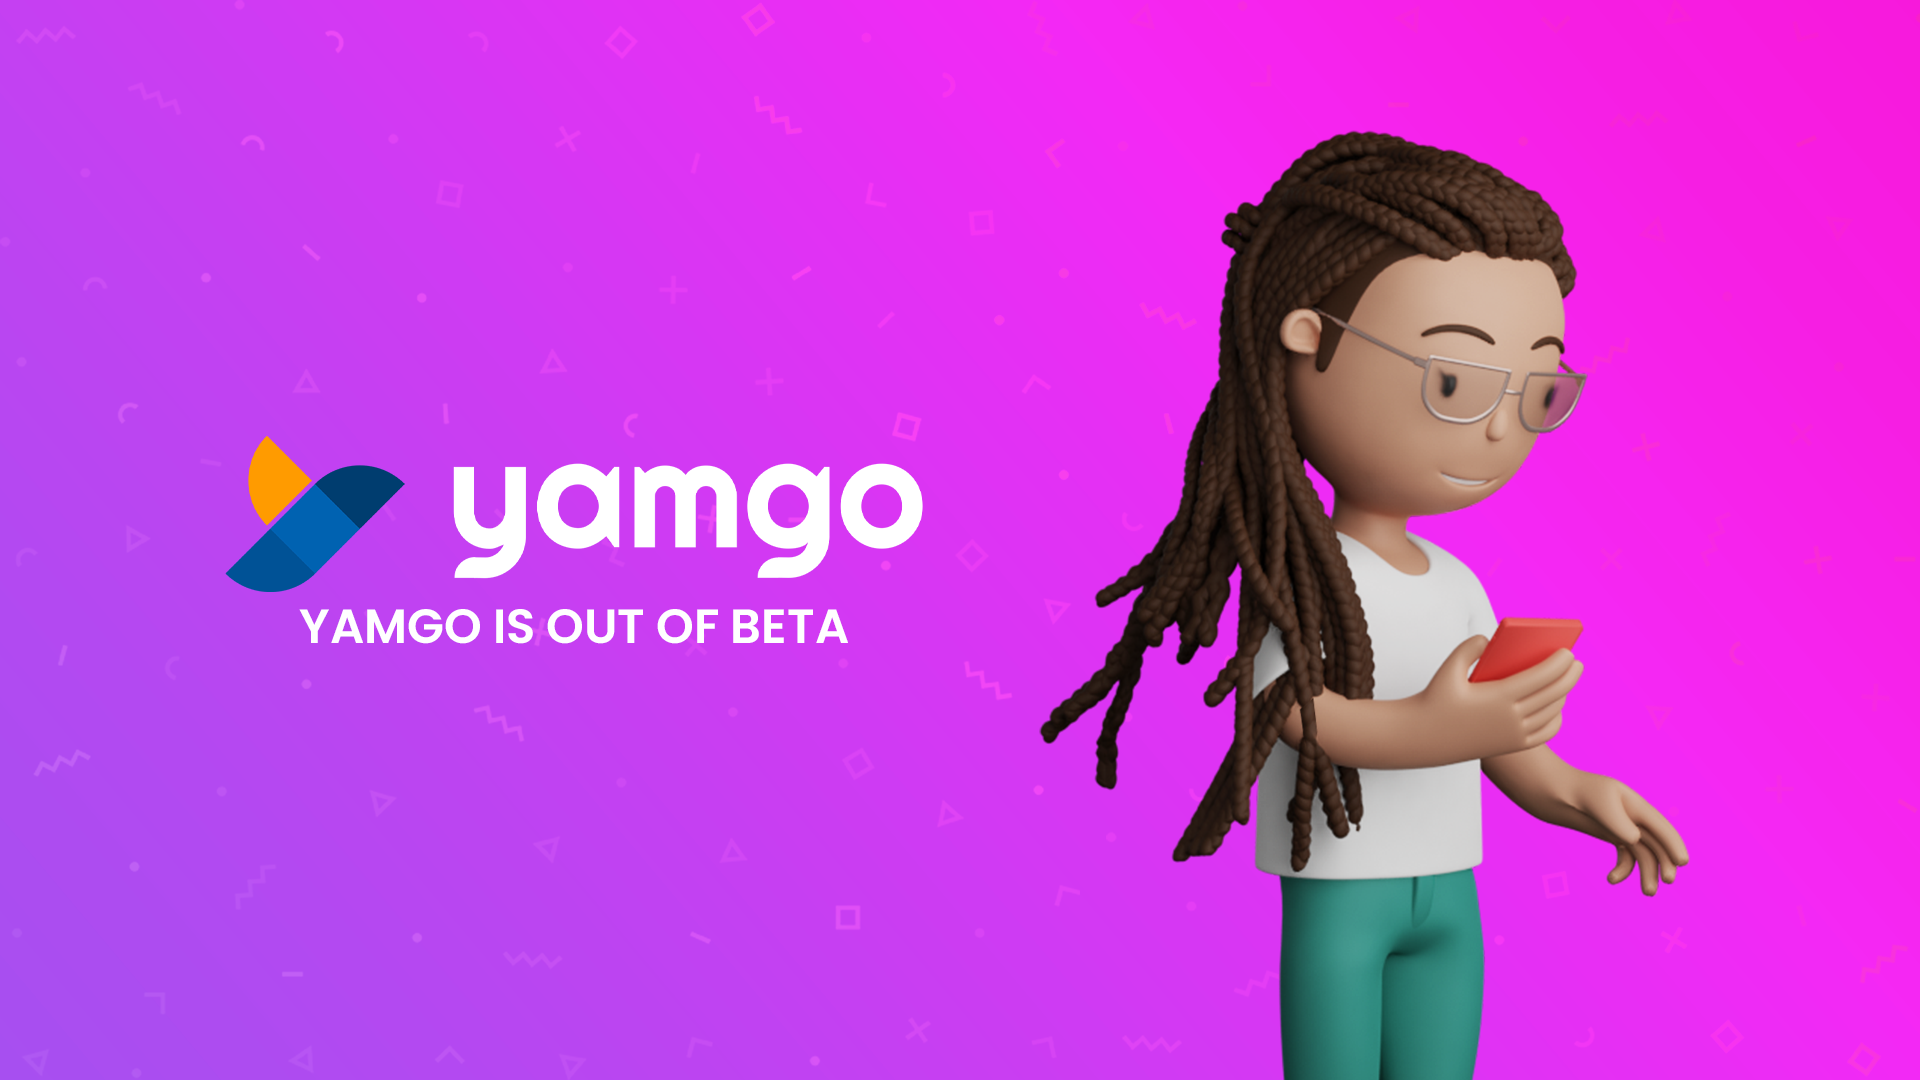 Yamgo is officially out of beta. What’s new in v1.0?